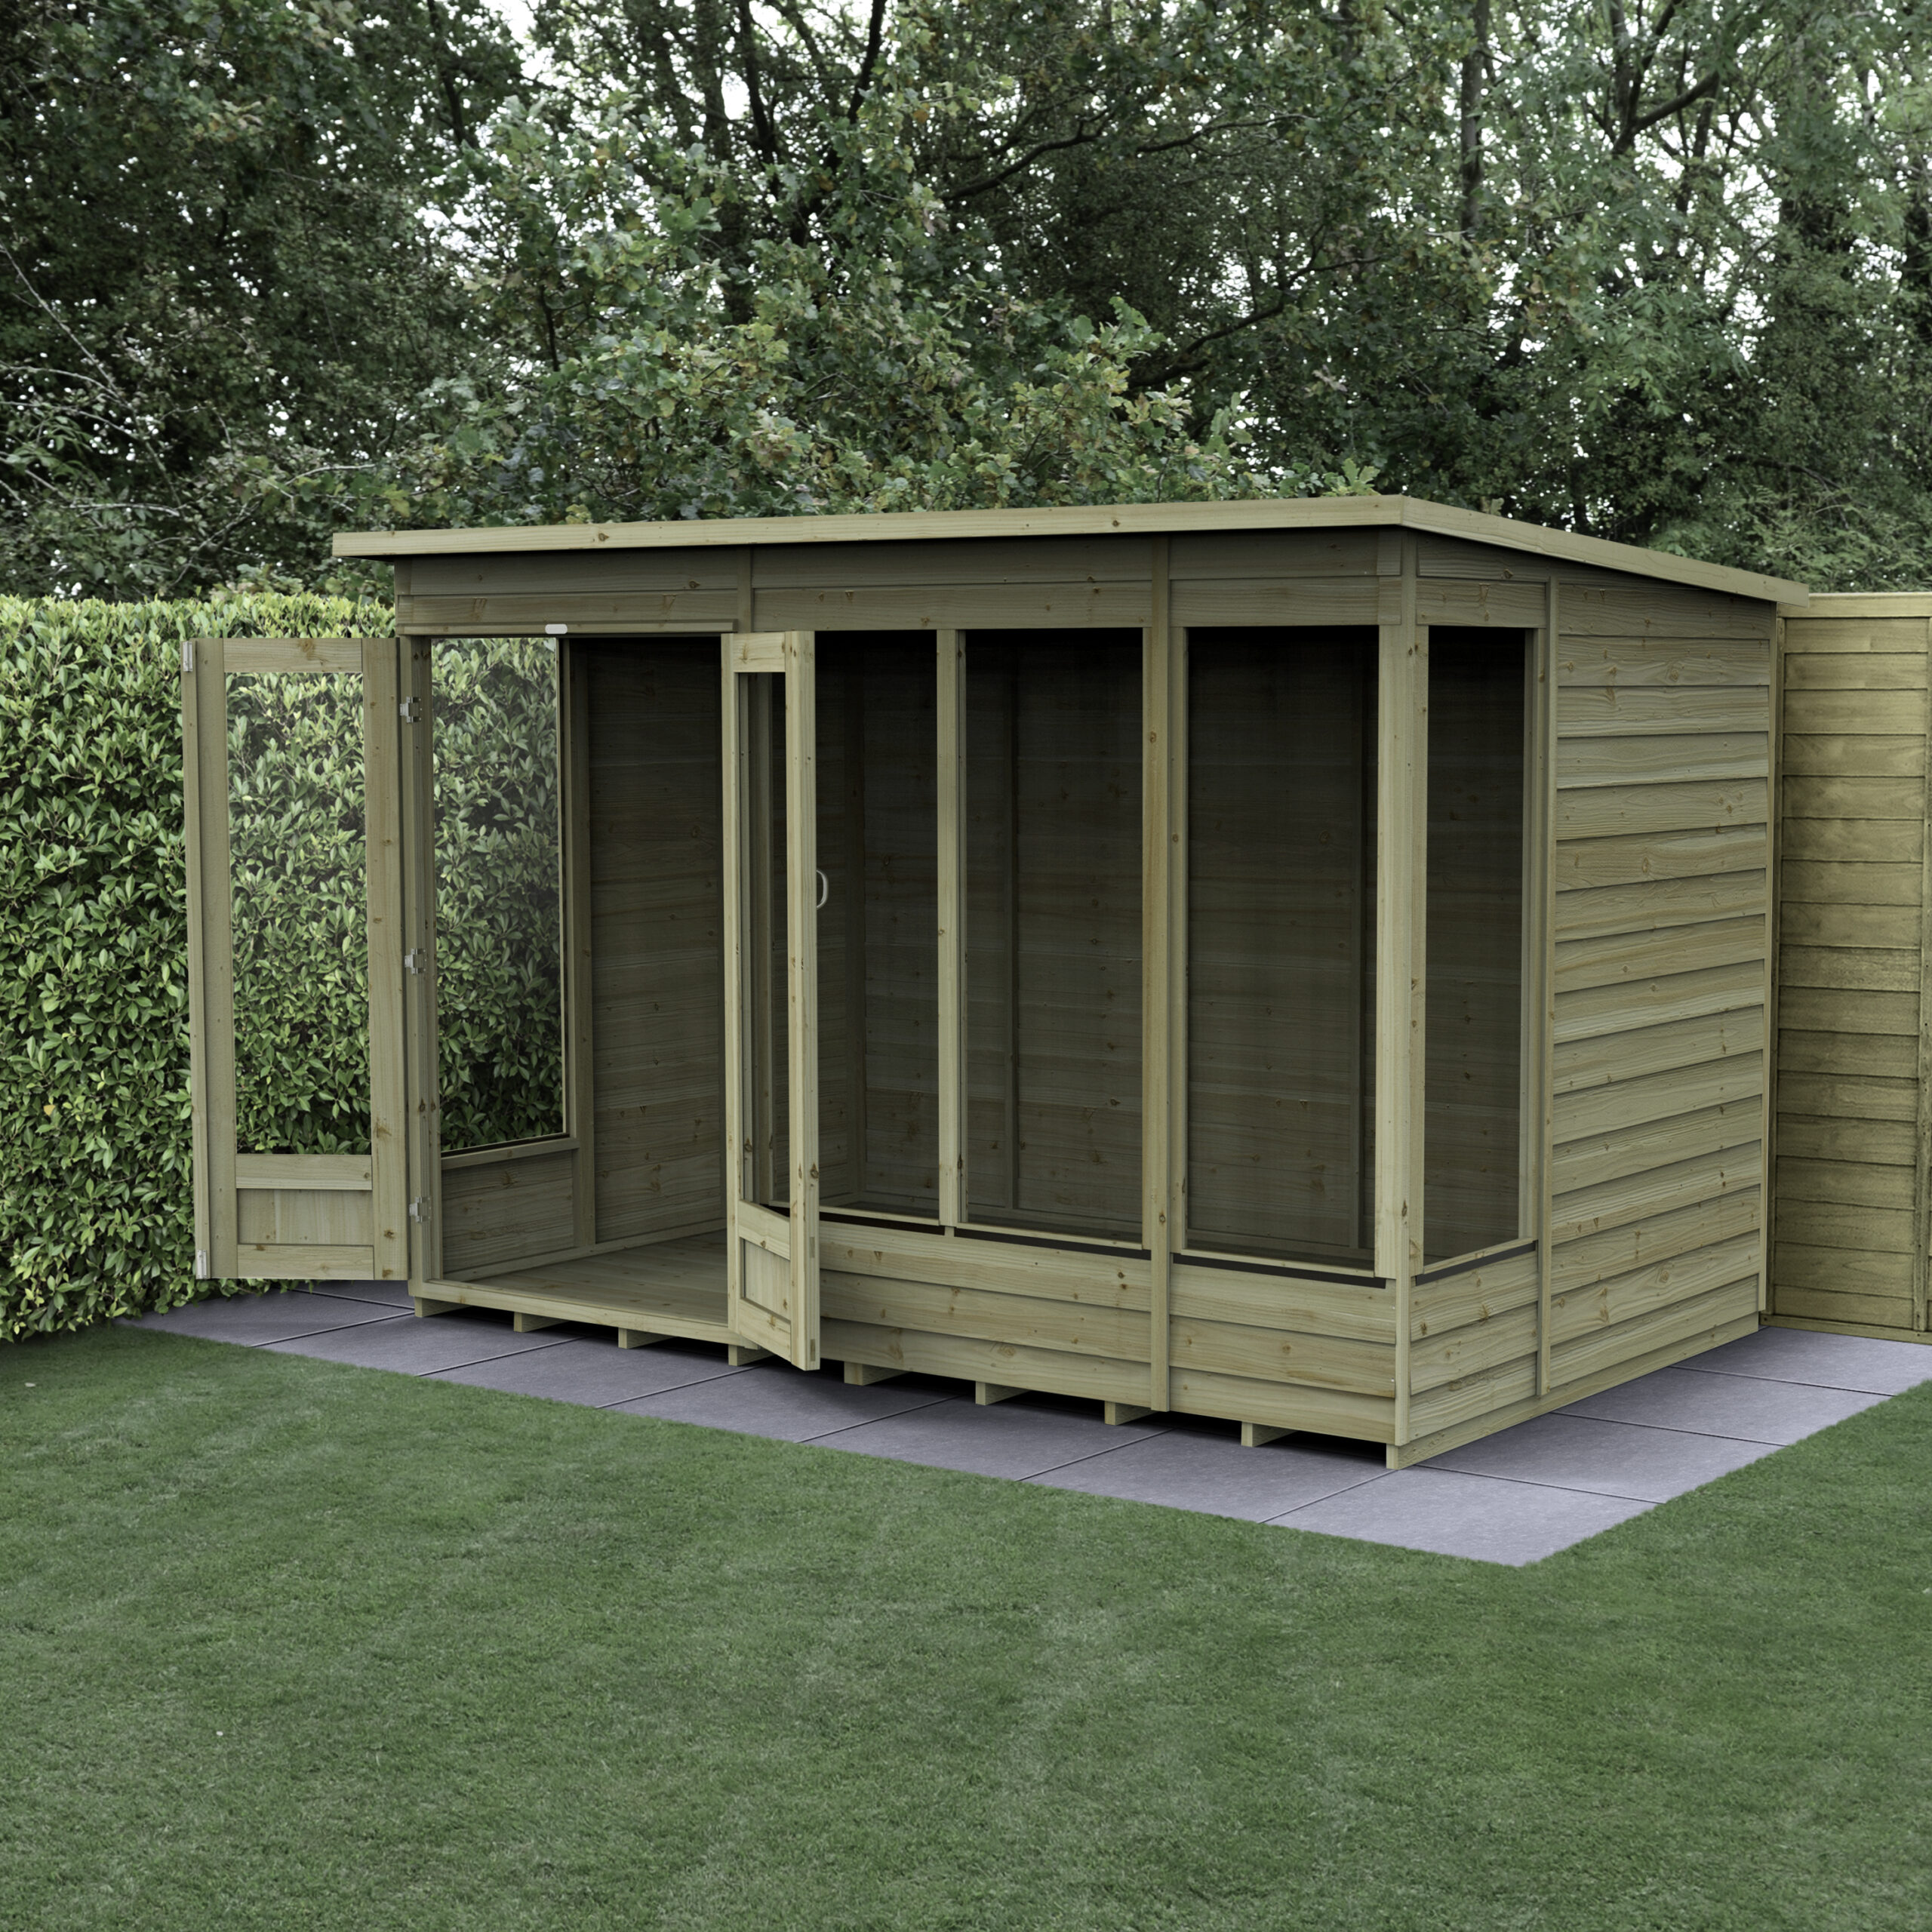 Forest Garden 10x6 4Life Overlap Pent Pressure Treated Summerhouse (Installation Included)